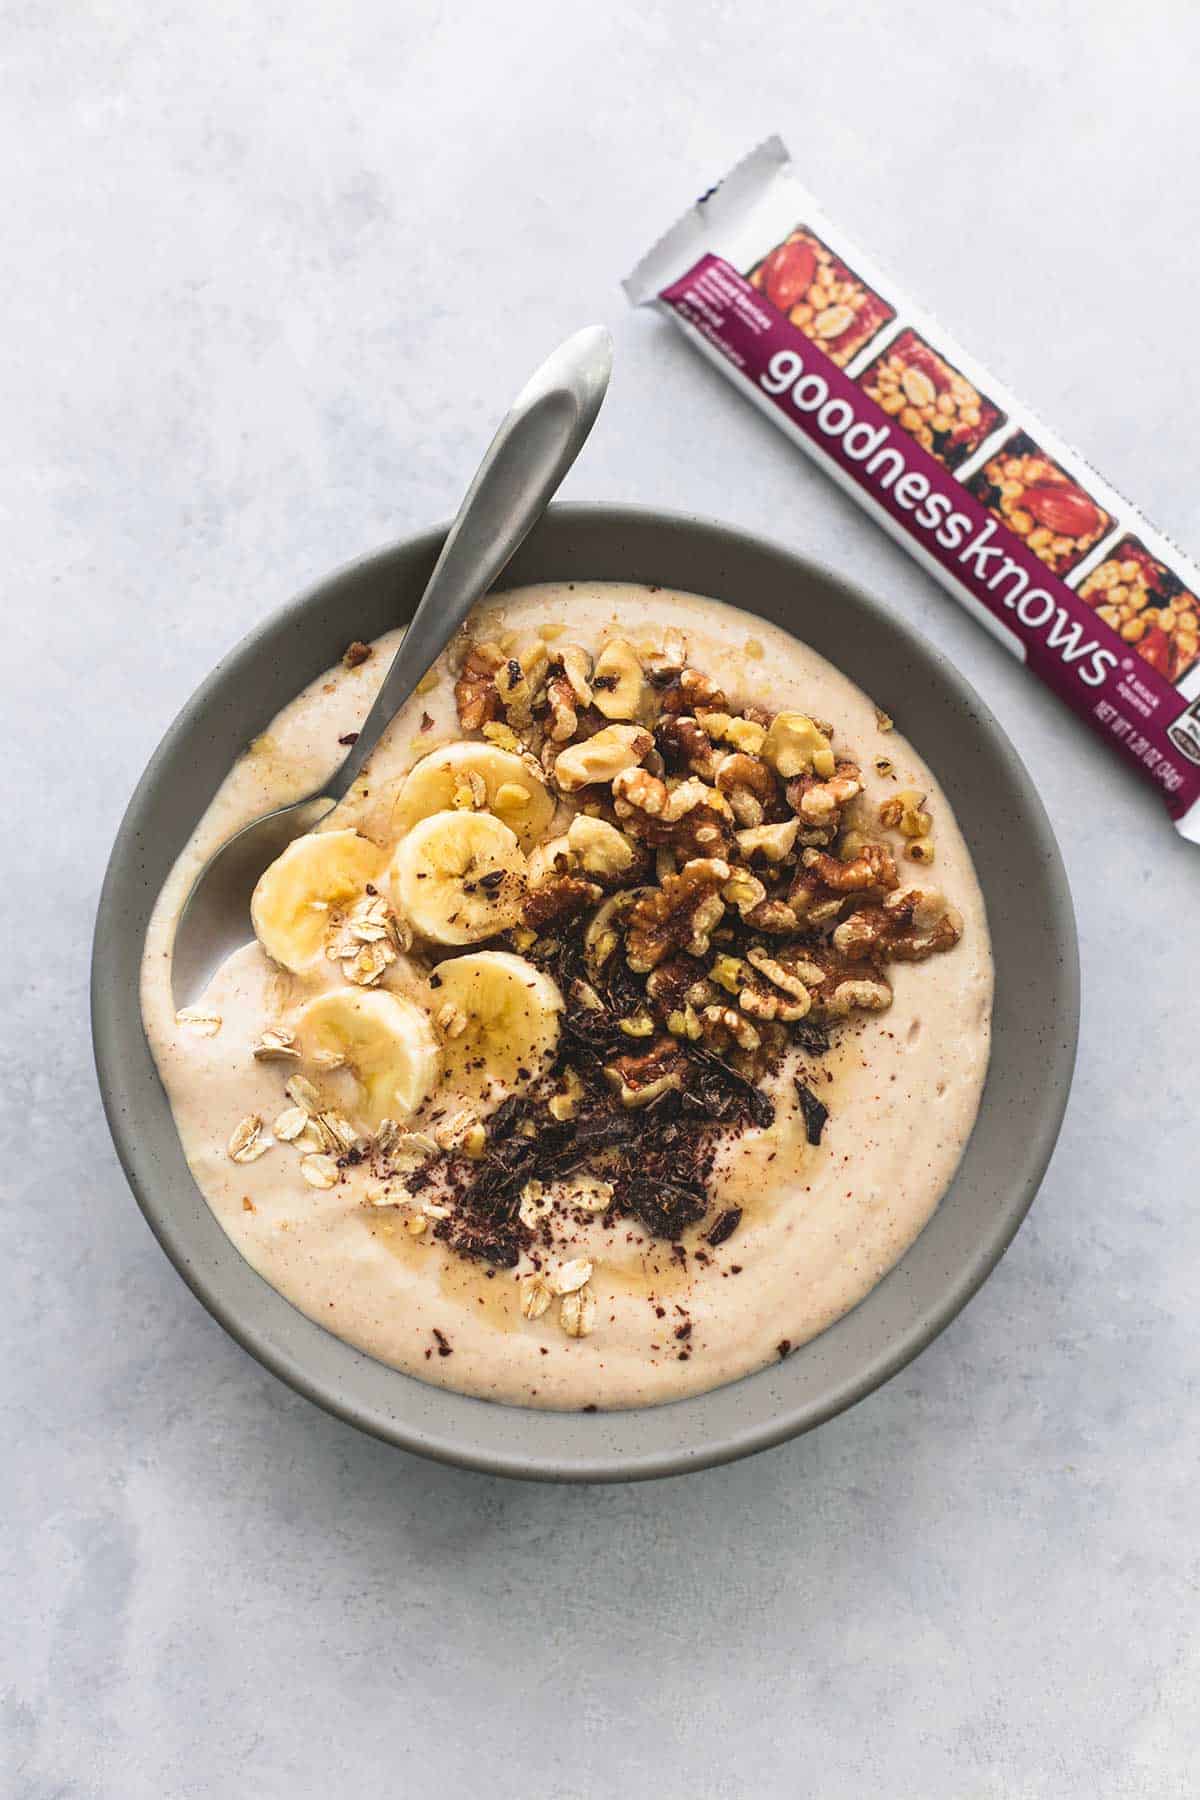 top view of a banana nut smoothie bowl with a spoon in it with a wrapped granola bar on the side.